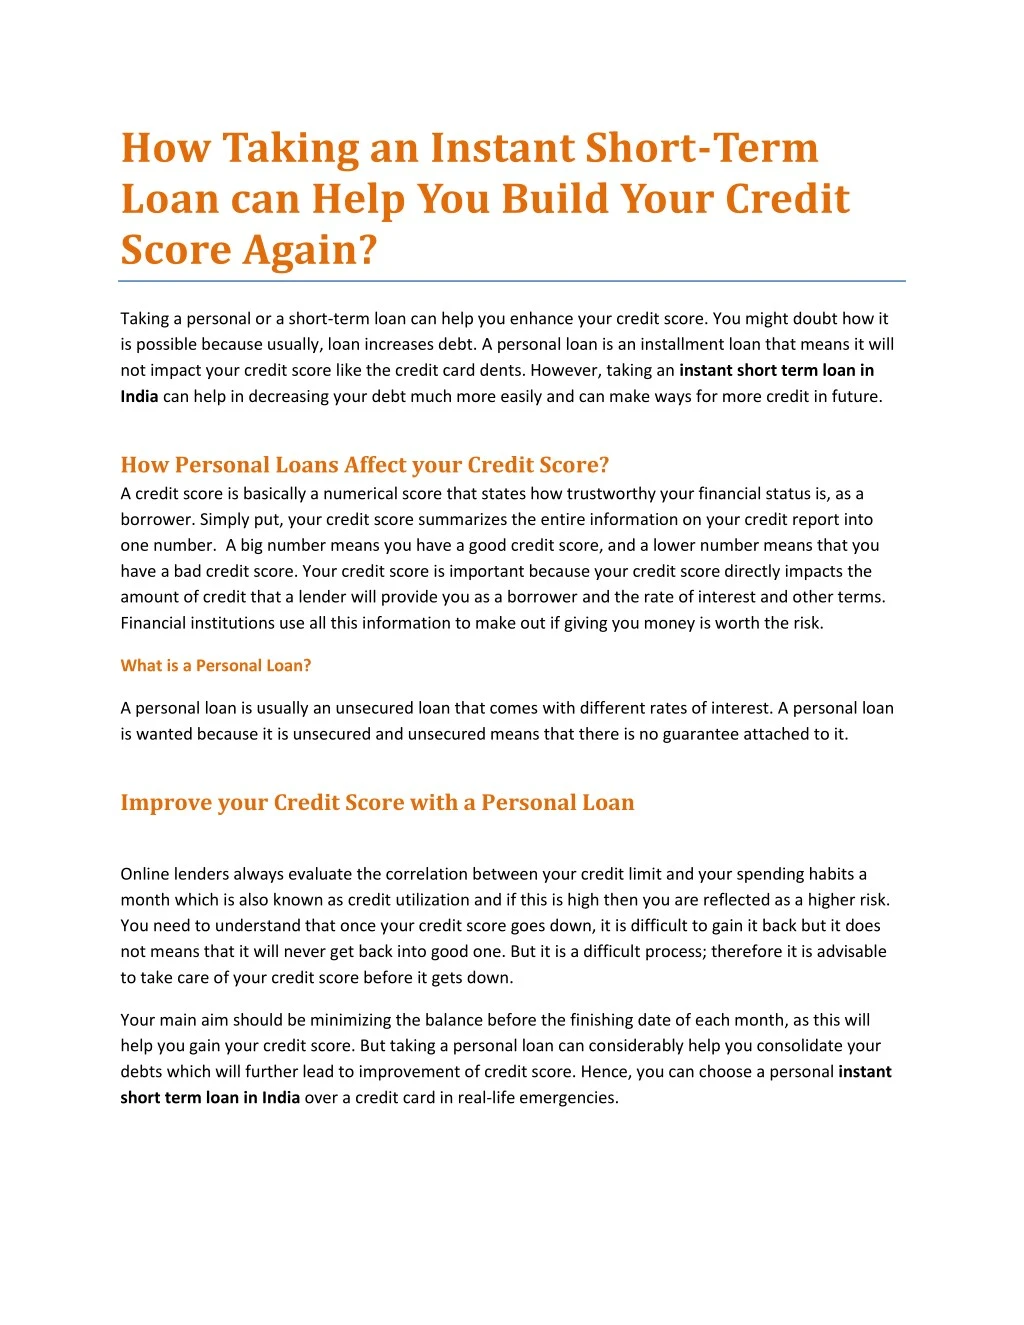 how taking an instant short term loan can help